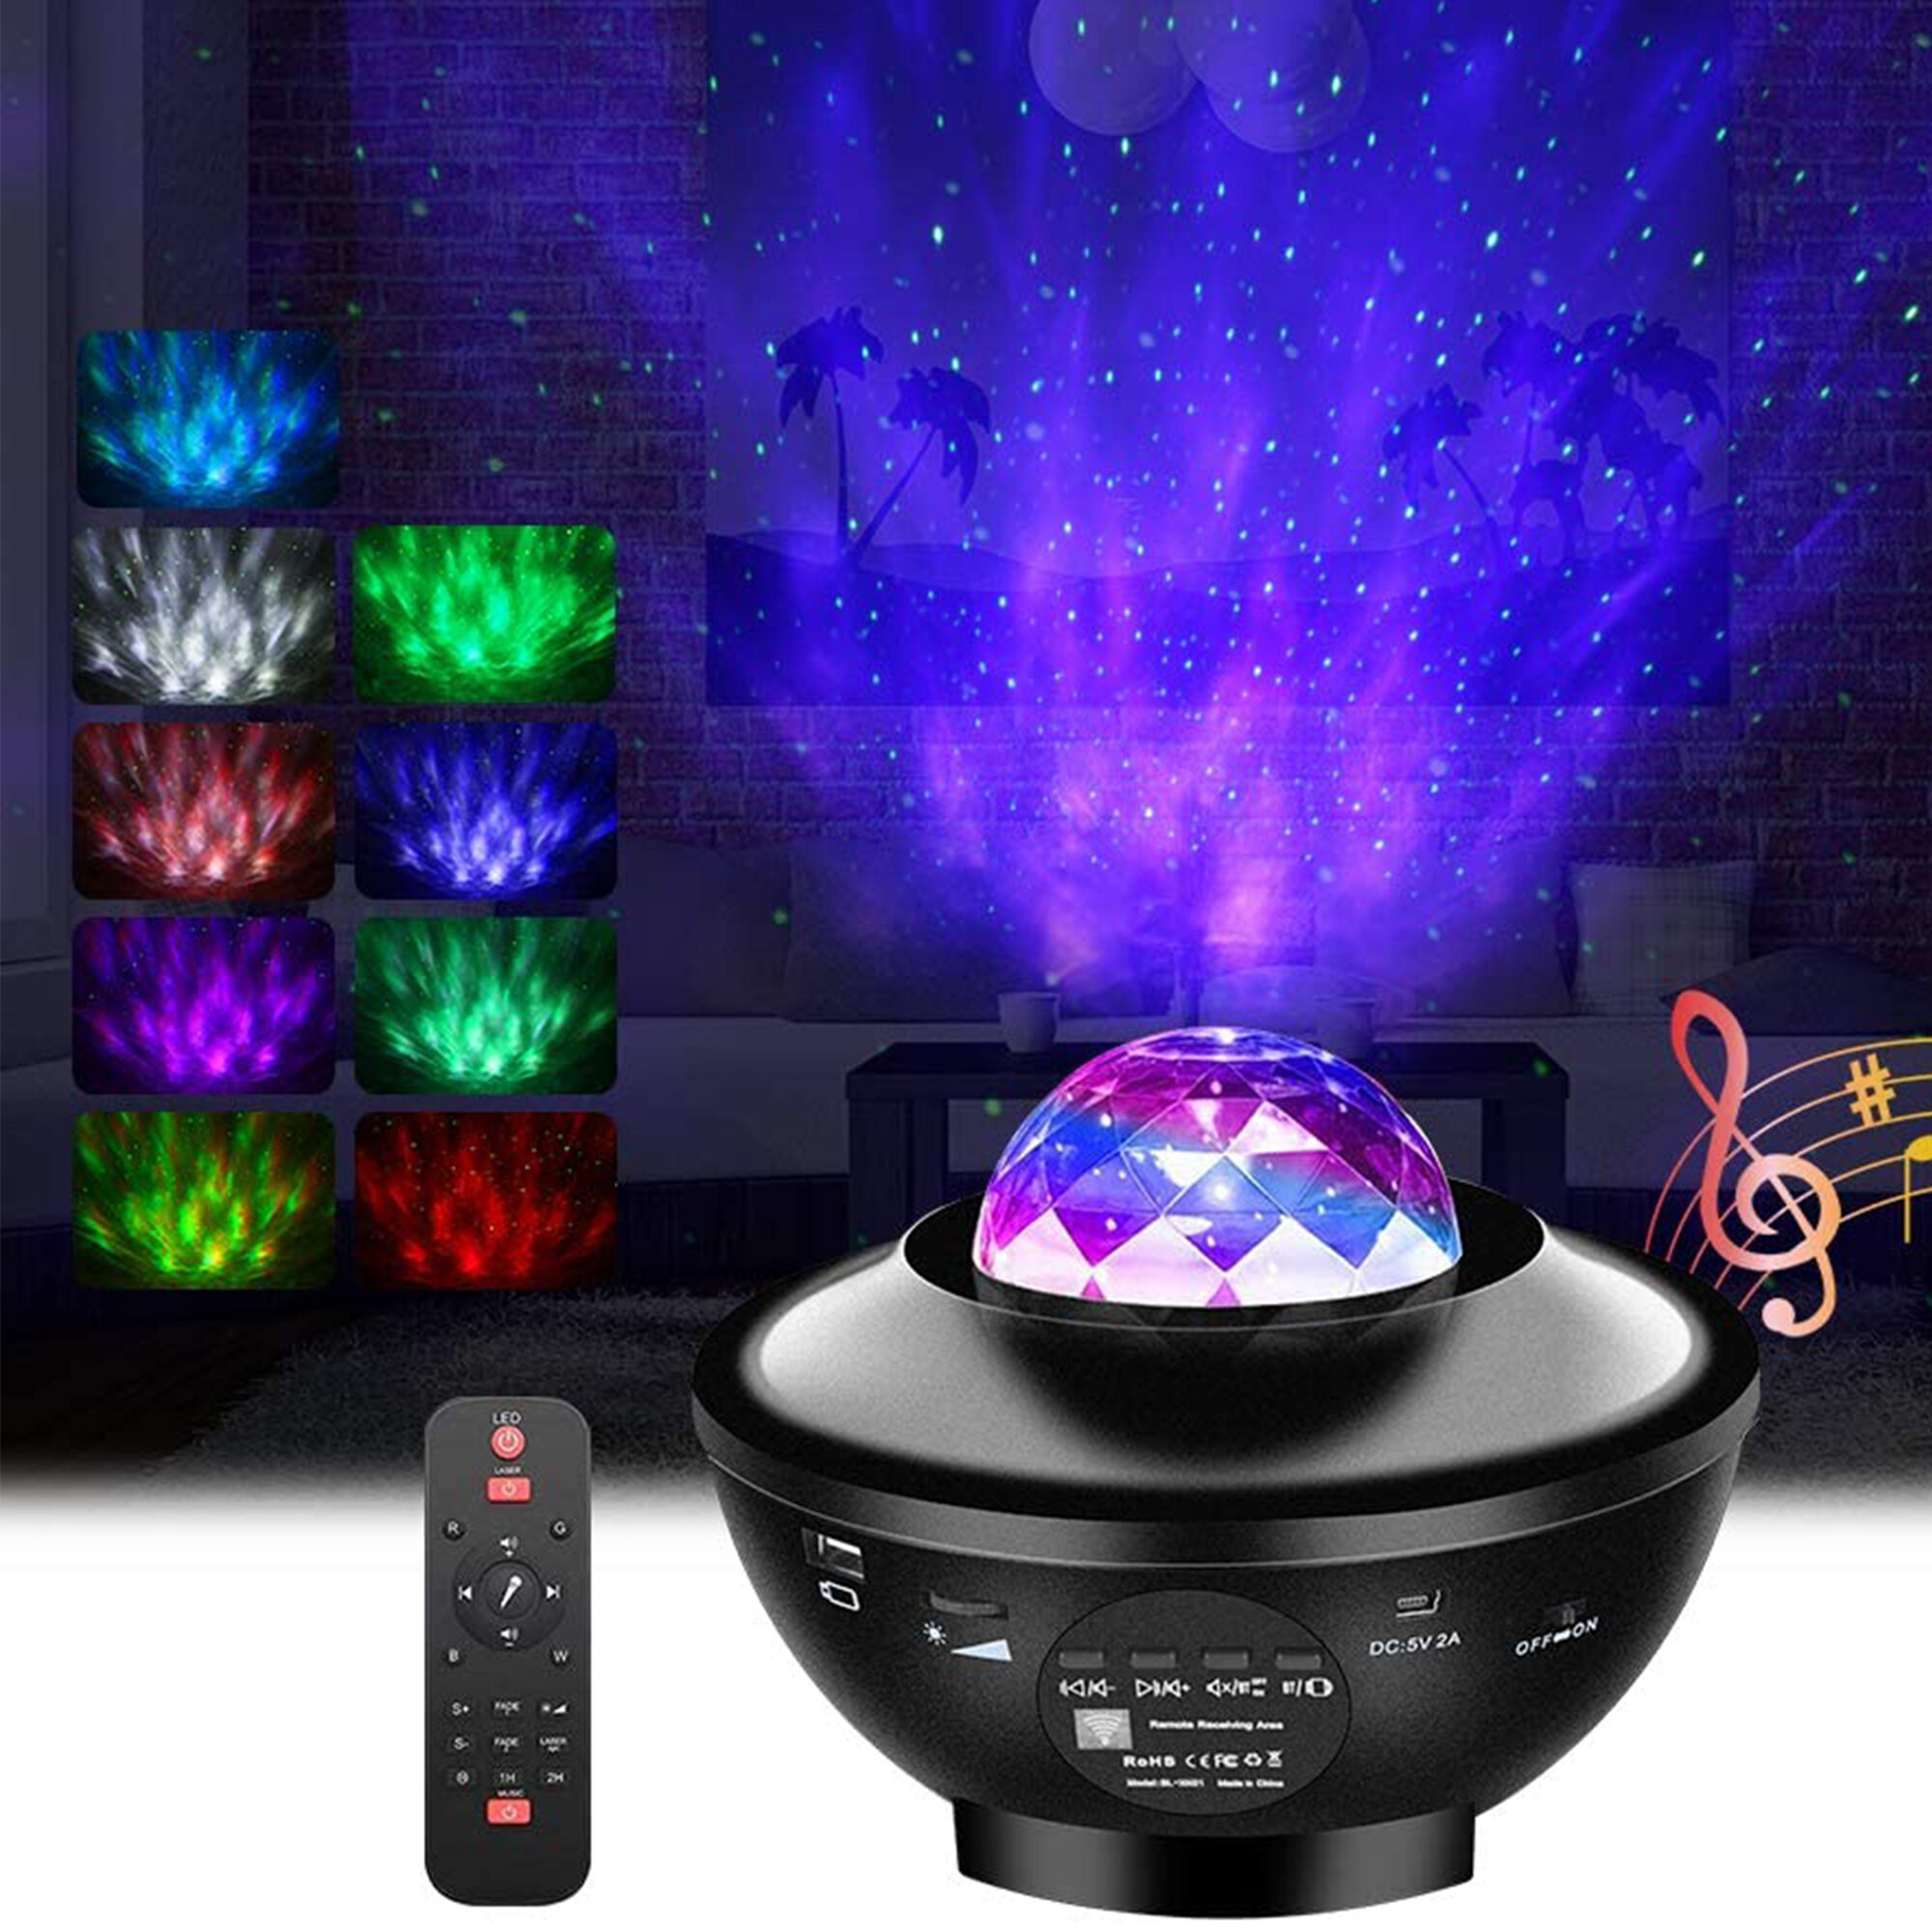 Sound Sensor Rotating Sleep Soothing Lamp for Kids Adults Home Party Decoration Remote Control Star Night Light Projector,3 in 1 Ocean Wave Starry Galaxy Projector with Music Speaker 